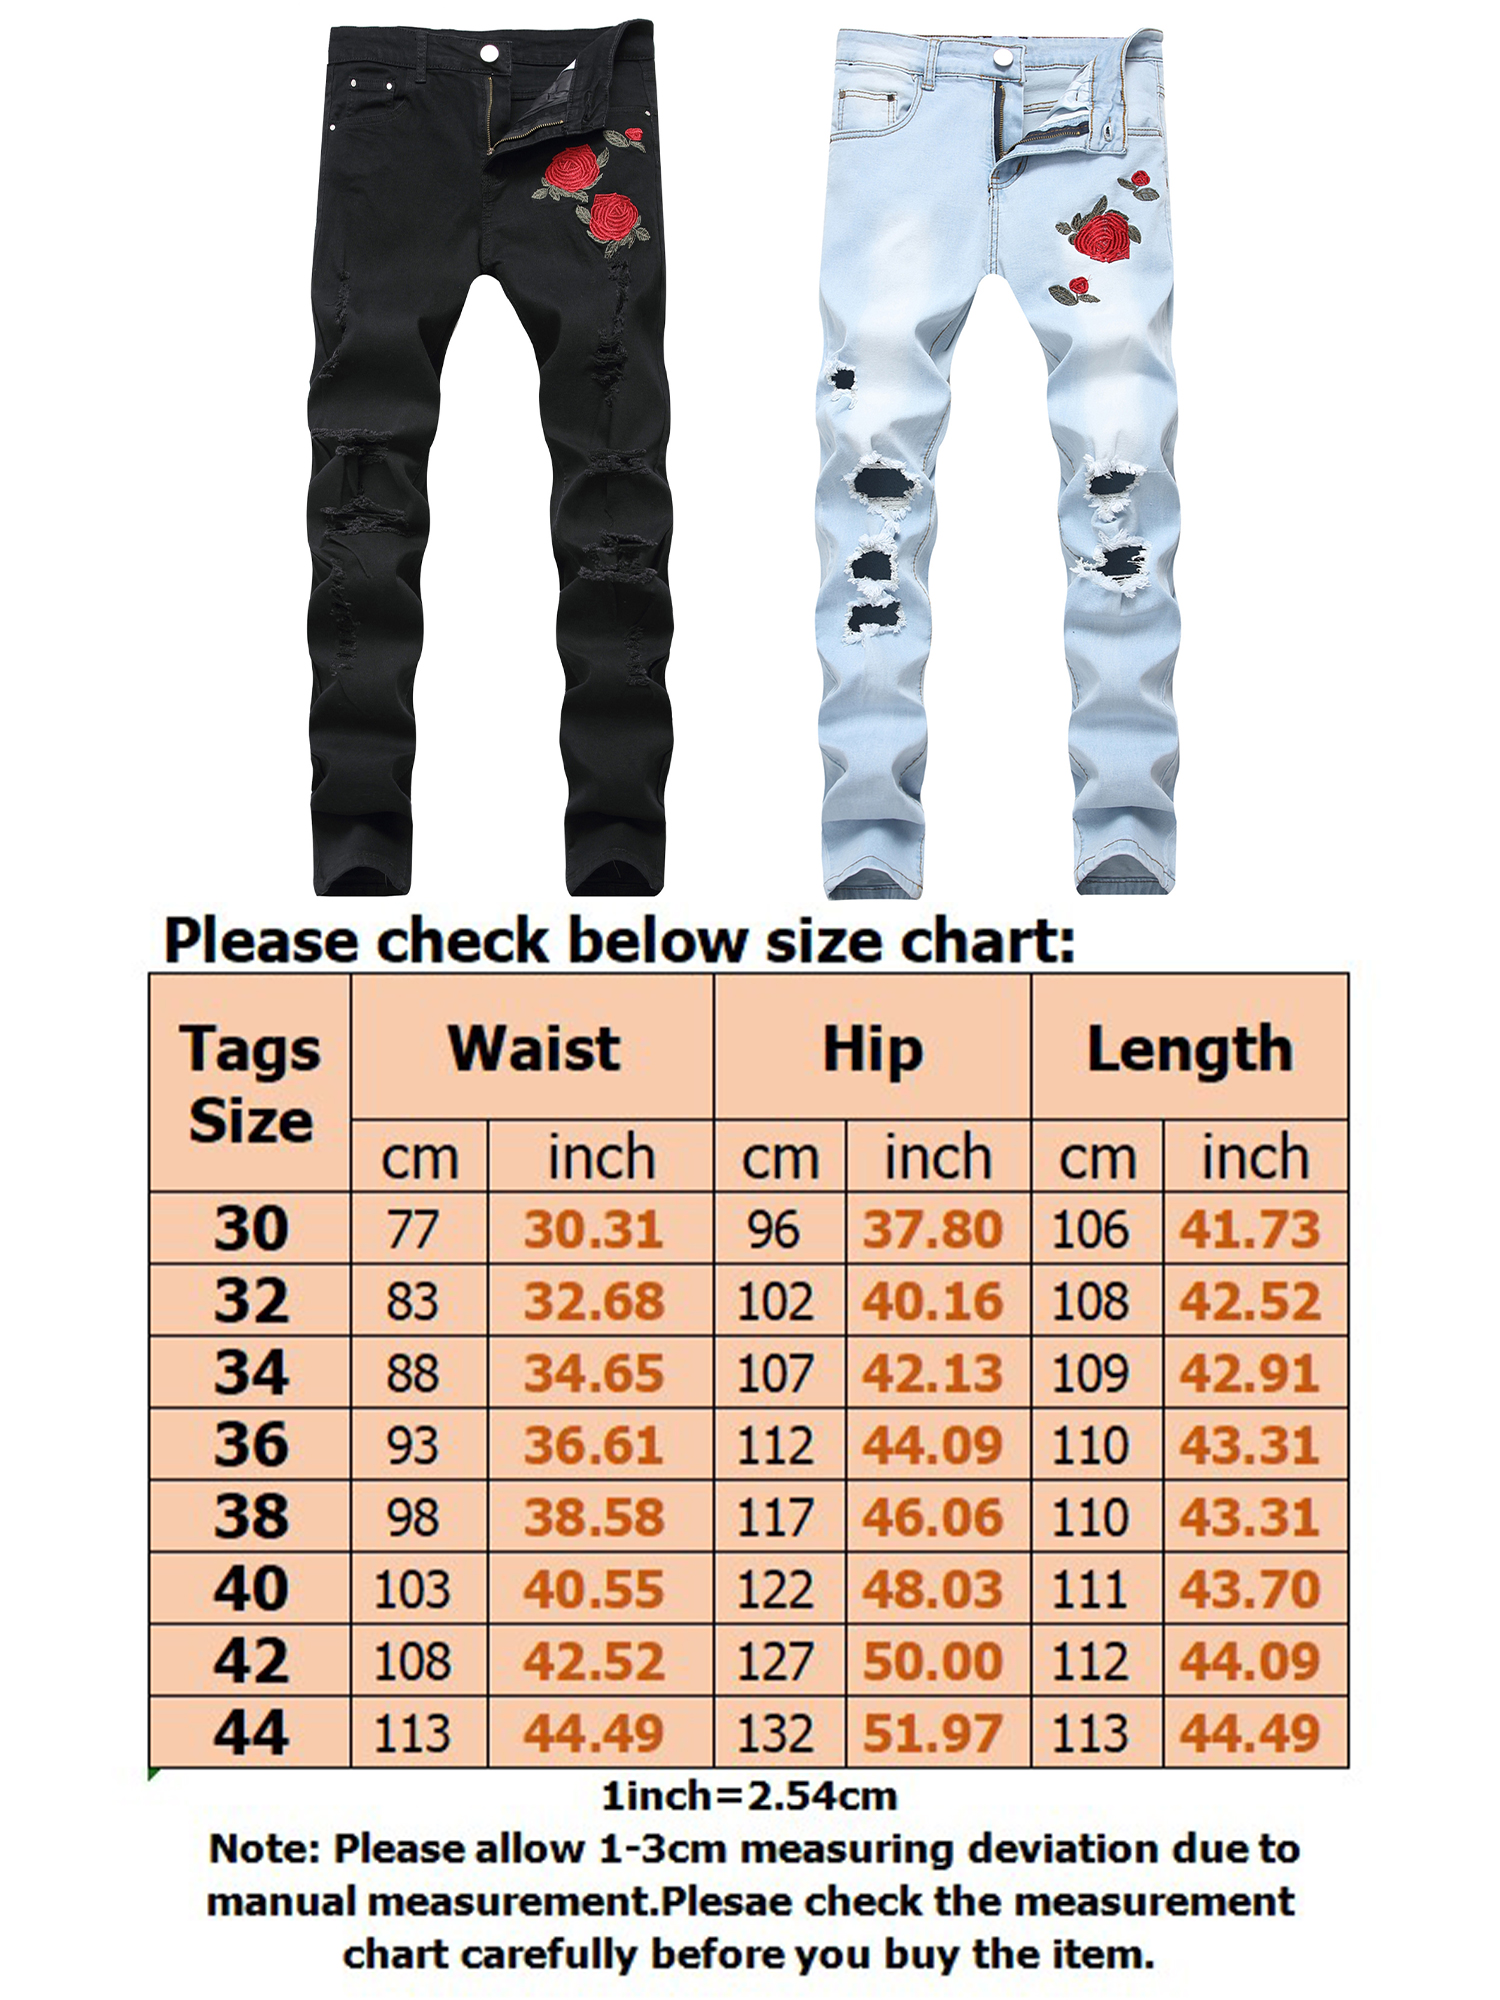 Mens Casual Stretchy Ripped Slim Fit Denim Jeans Washed Skinny Tapered Leg Jeans Bar Dancing Embroidery Destroyed Jeans - image 2 of 3